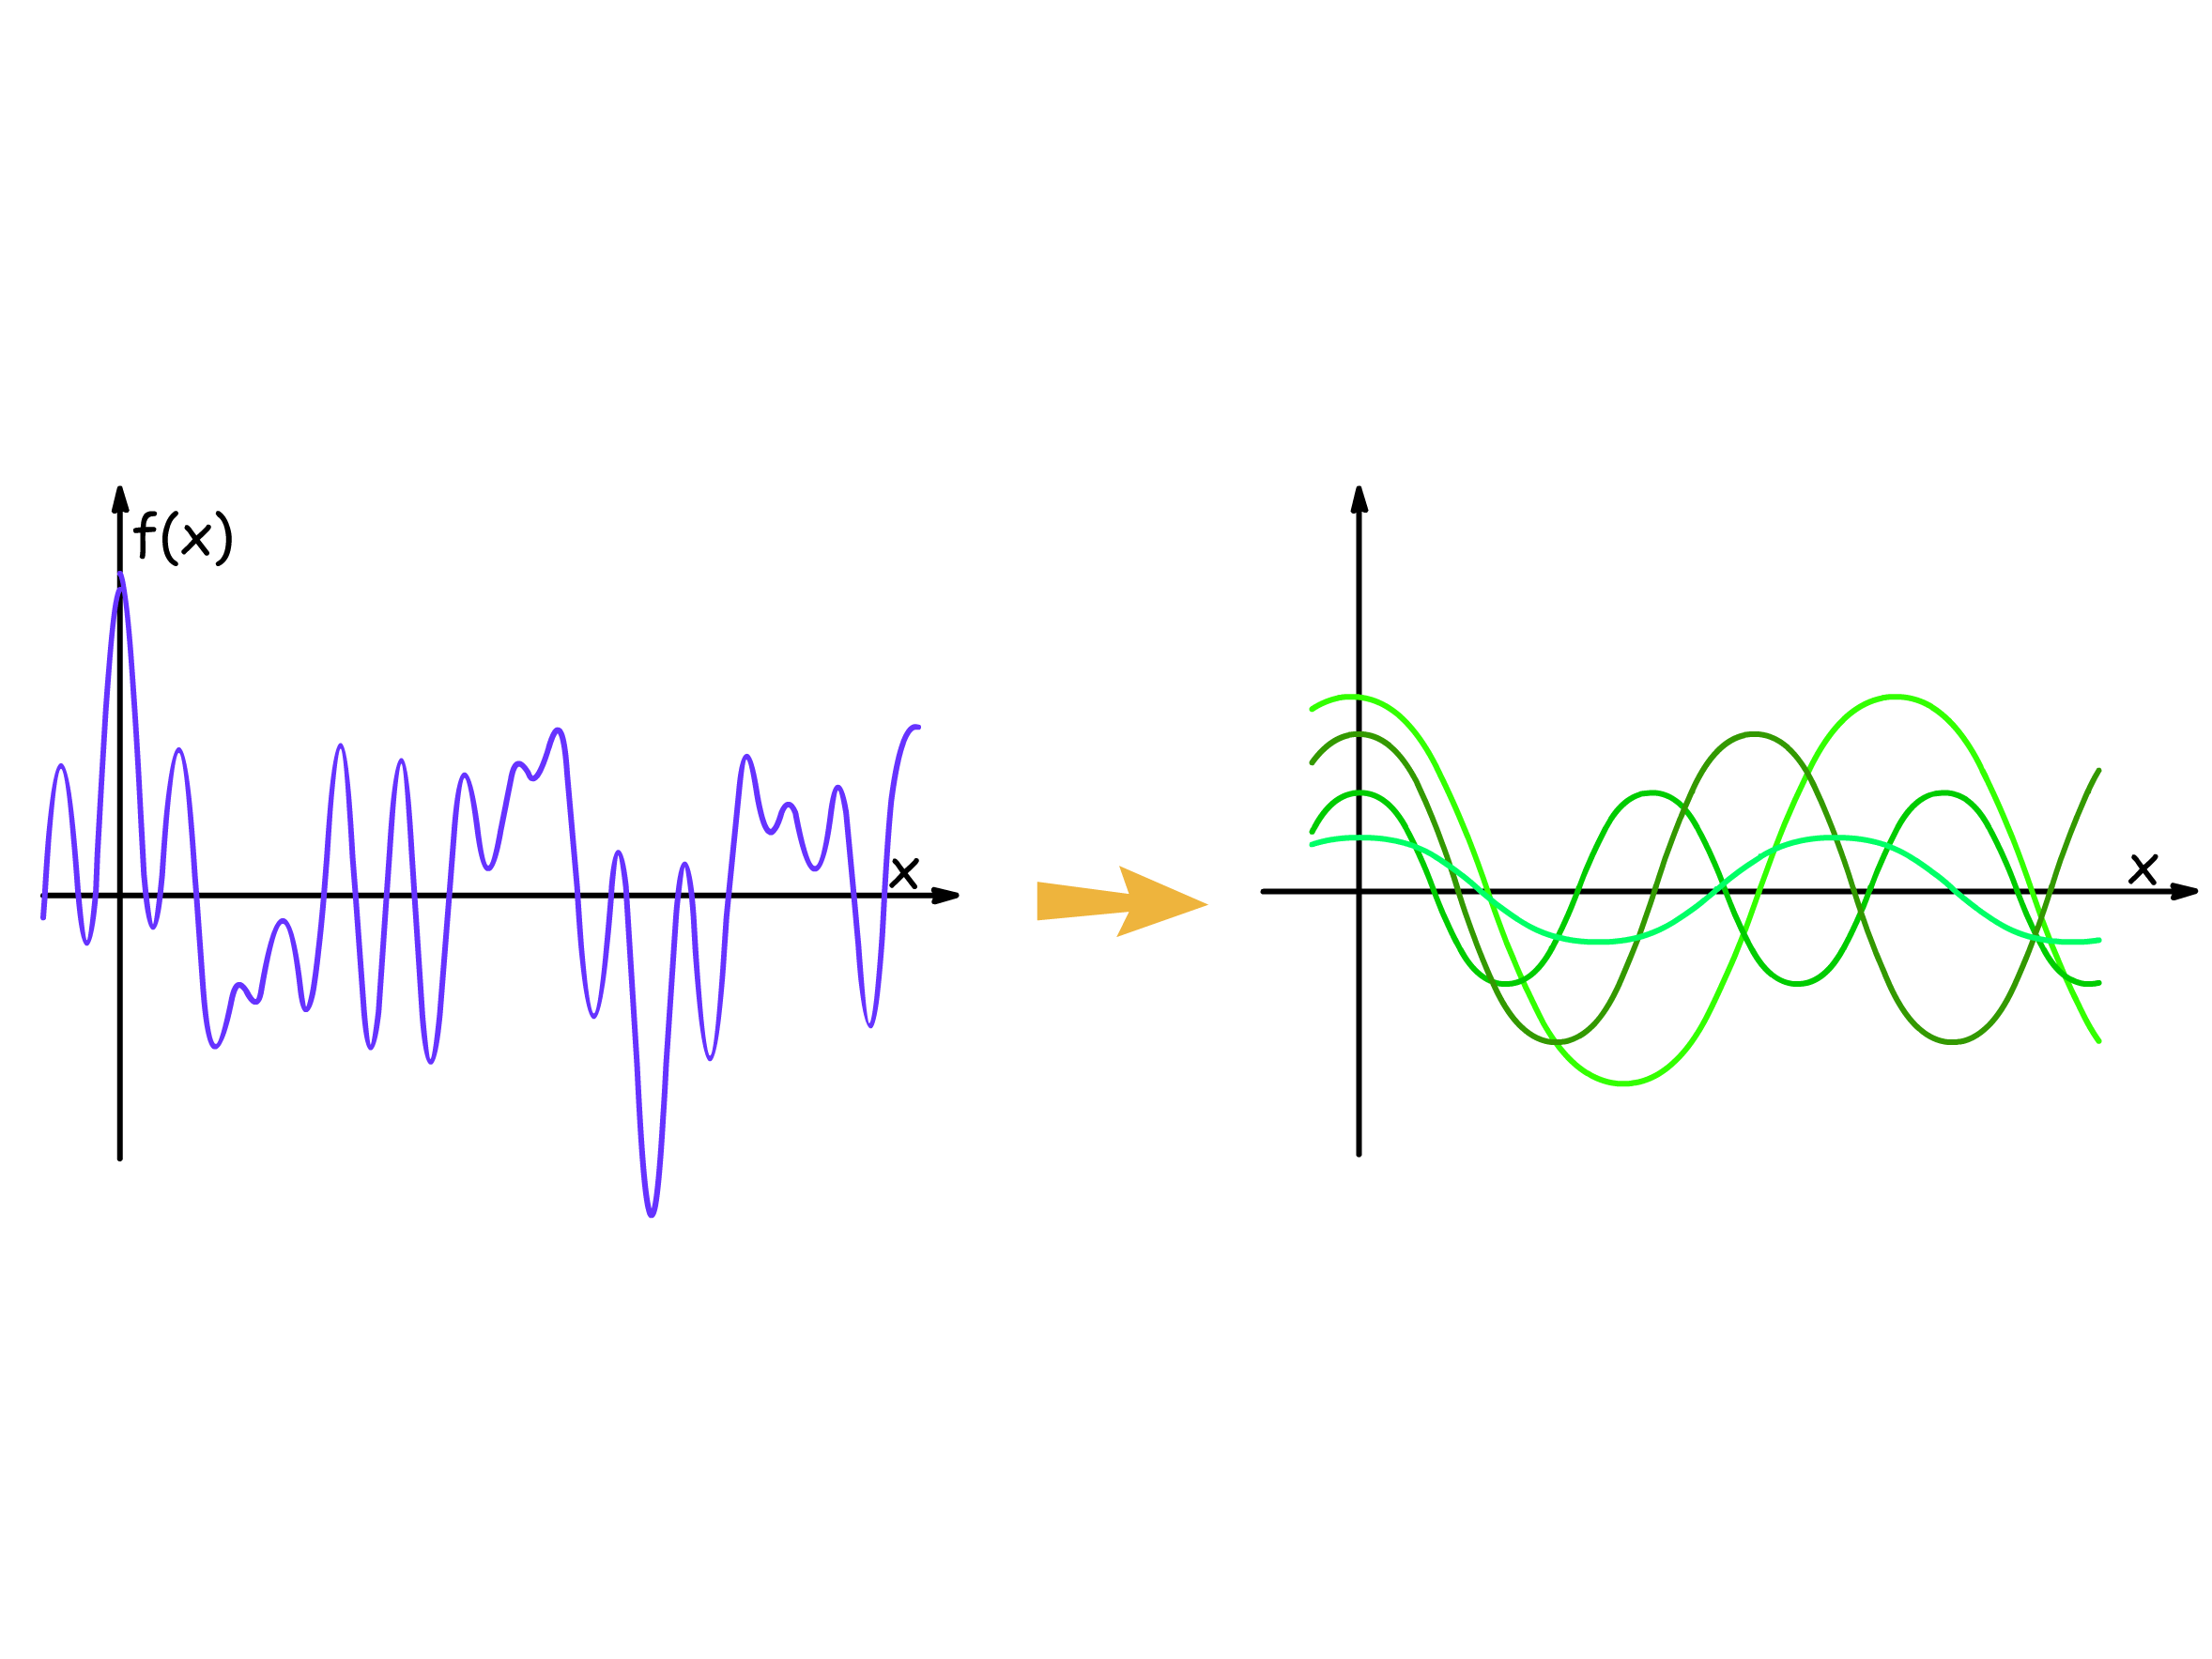 fourier_analysis_1.png